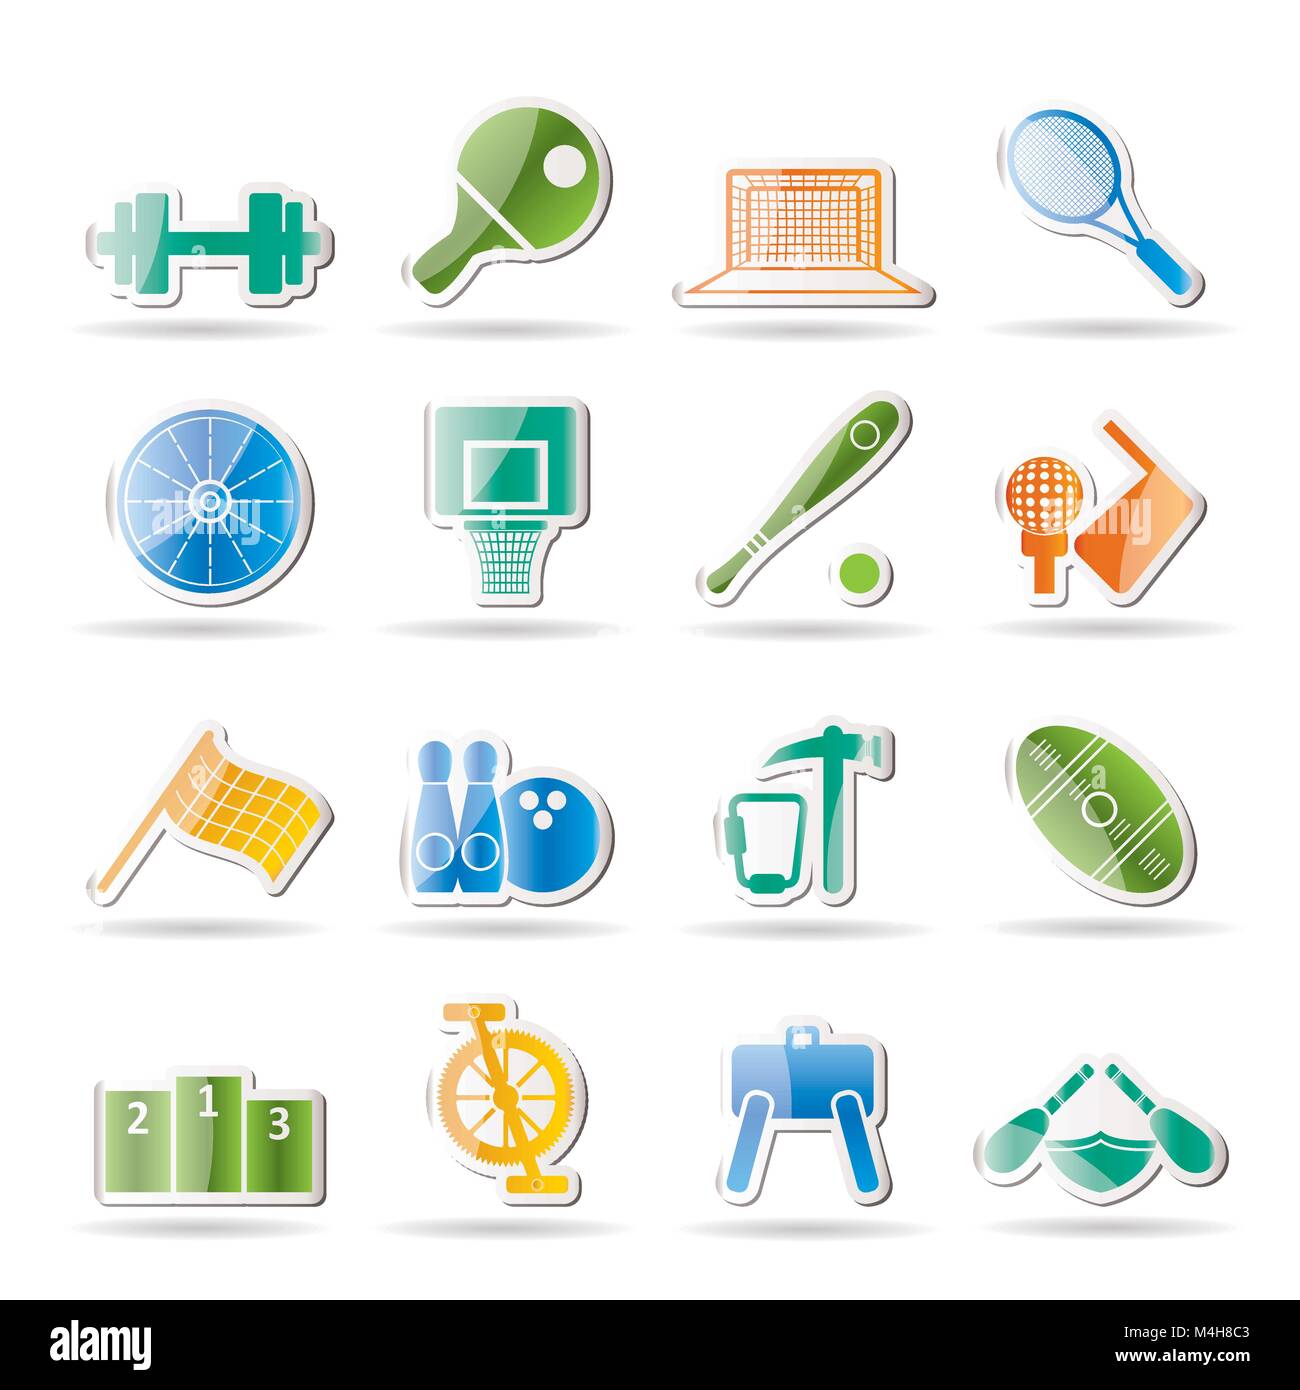 Sports gear and tools - vector icon set Stock Vector